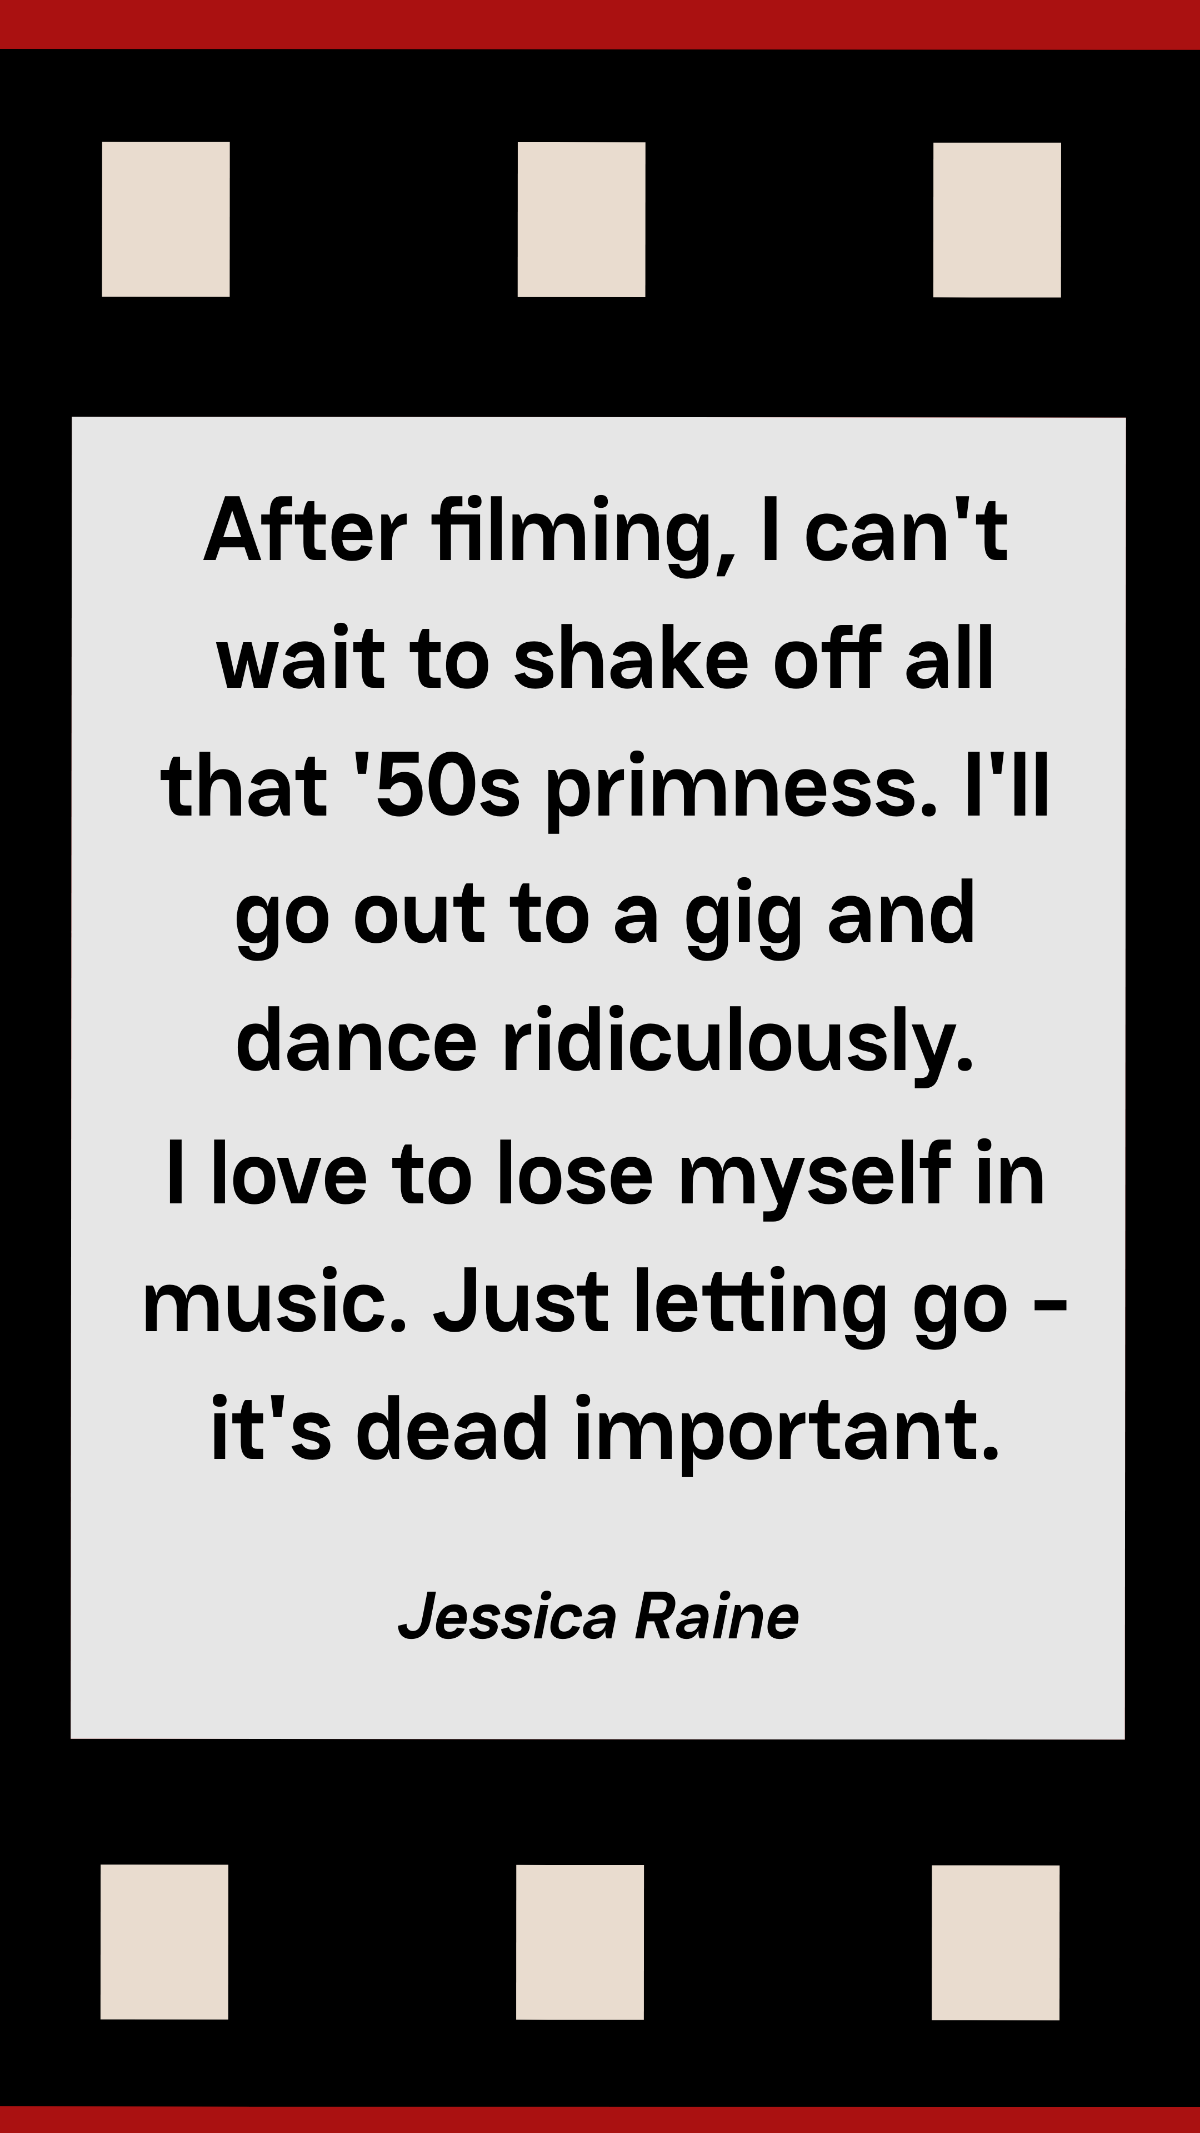 Jessica Raine - After filming, I can't wait to shake off all that '50s primness. I'll go out to a gig and dance ridiculously. I love to lose myself in music. Just letting go - it's dead important. Tem